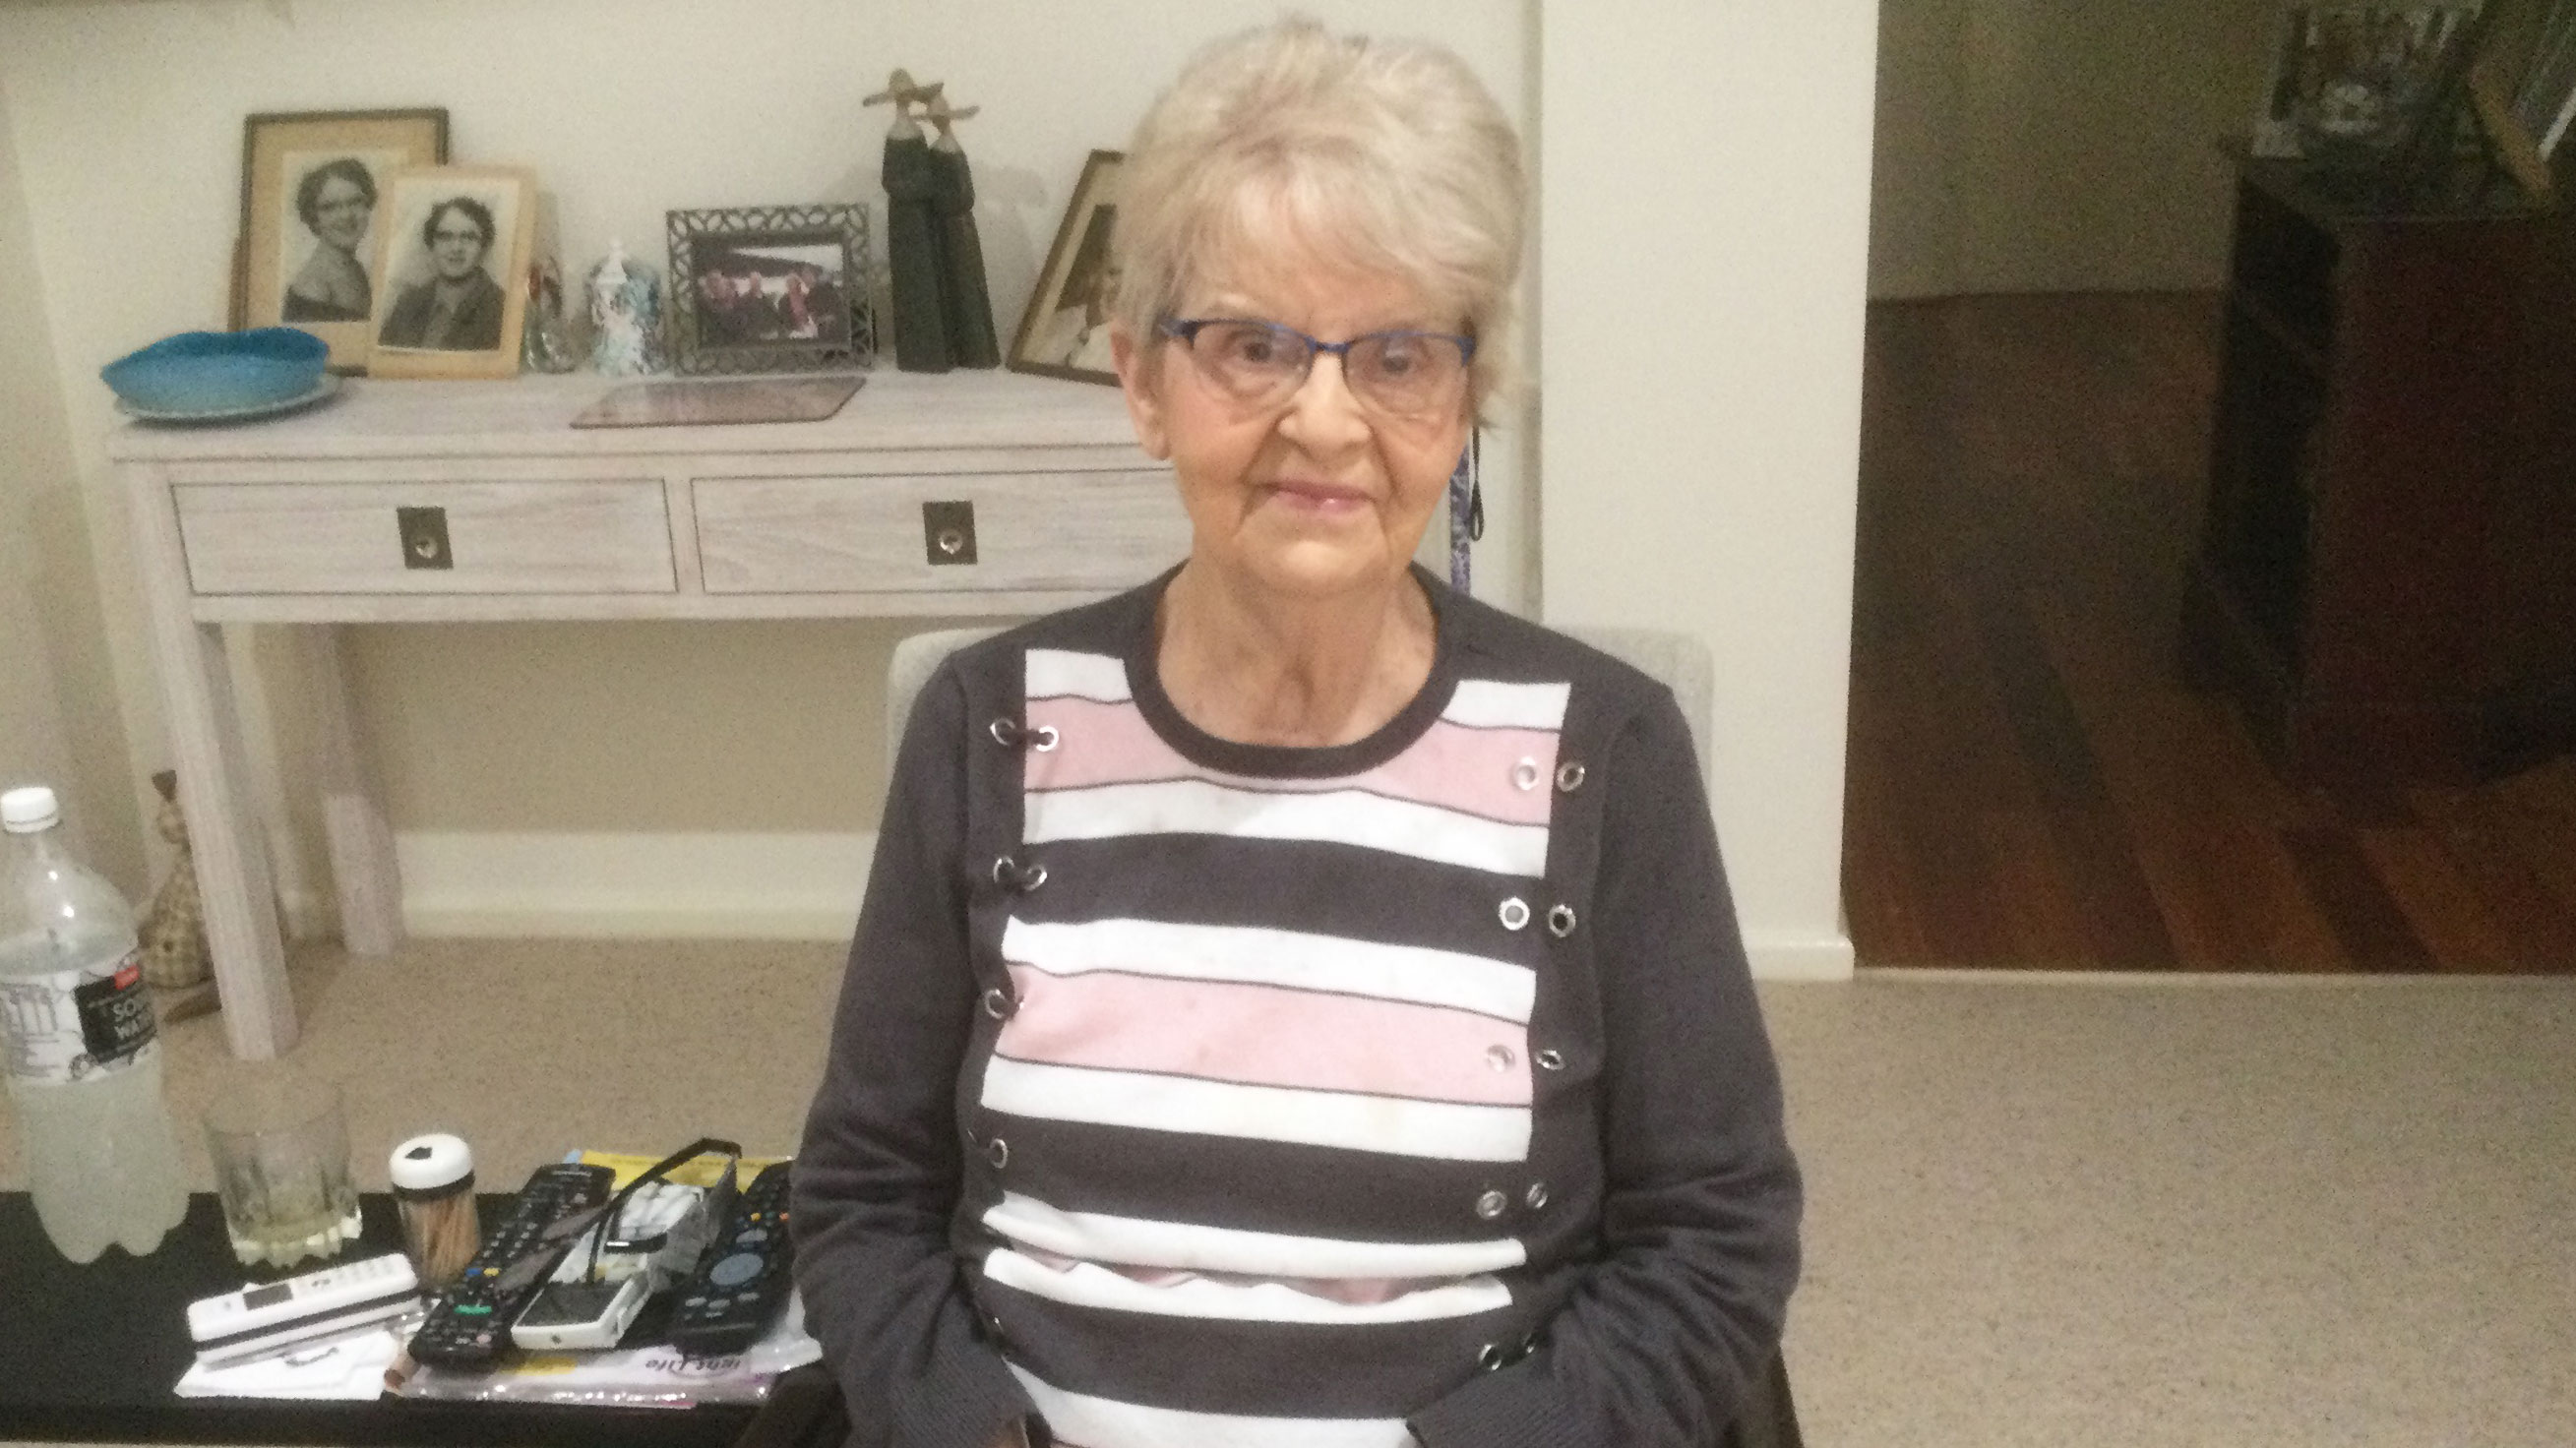 Maureen Deans' savings have been wiped out after a scammer stole $23,500 from her.